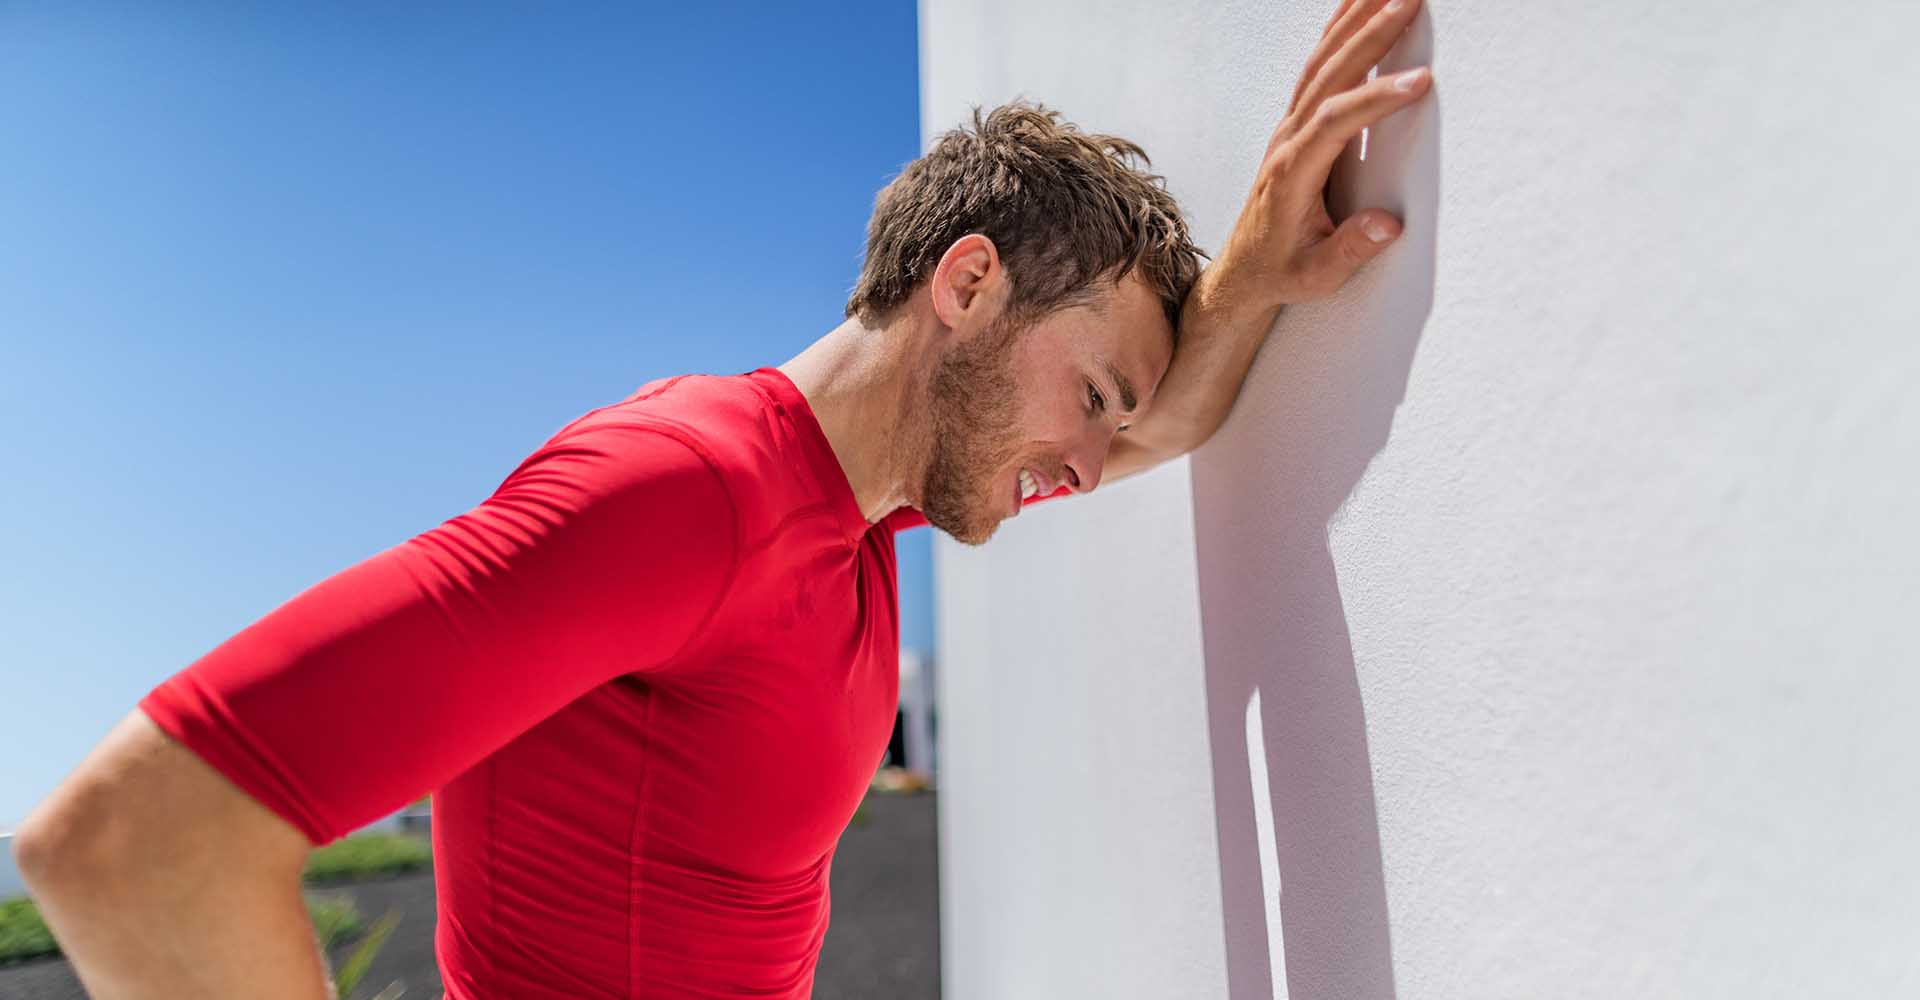 Exhausted man leaning on the wall due to fatigue breathing difficulty after doing physical exercises